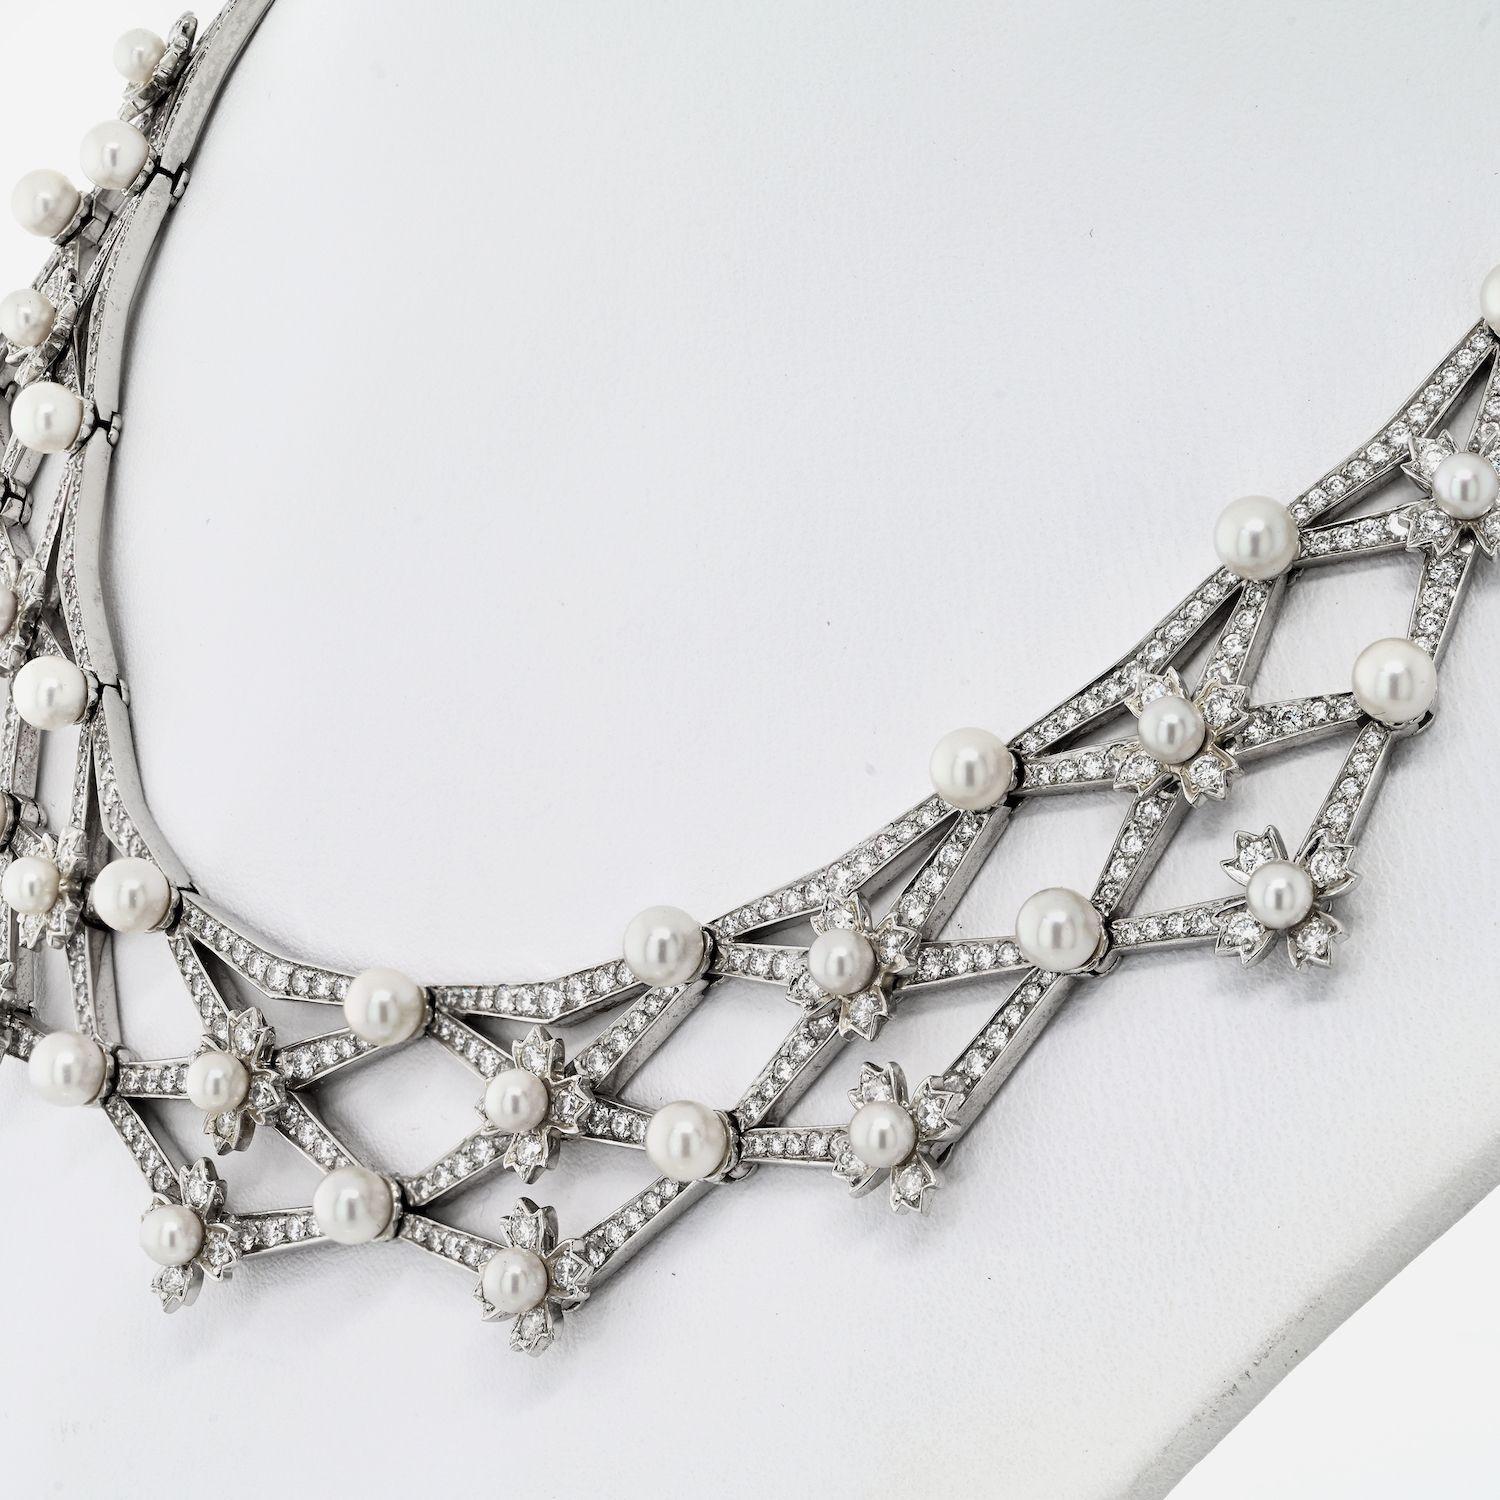 The Tiffany & Co platinum handcrafted diamond and cultured pearl bib necklace is a breathtaking work of art. Meticulously crafted with utmost precision and care, this exquisite piece showcases the perfect marriage of diamonds and cultured pearls.